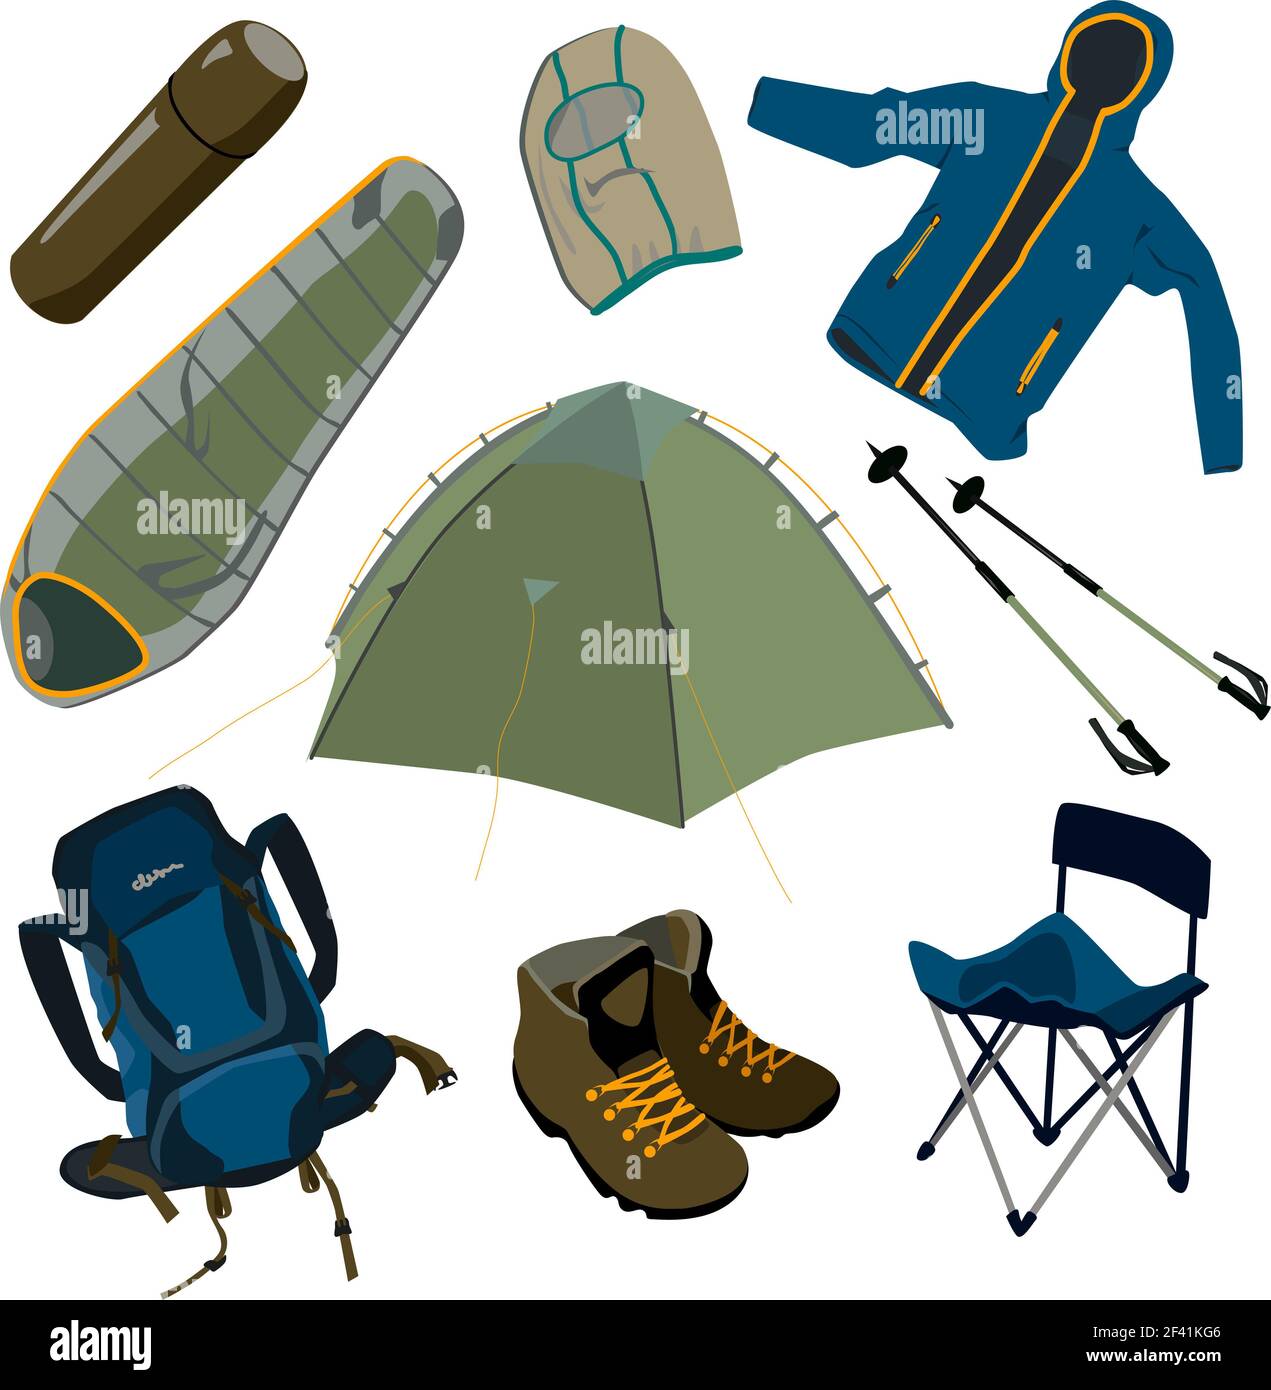 vector object set of outdoor equipment, camping, hiking items: sleeping bag, tent, backpack, tourist thermos, trekking poles, boots, camping chair, ou Stock Photo